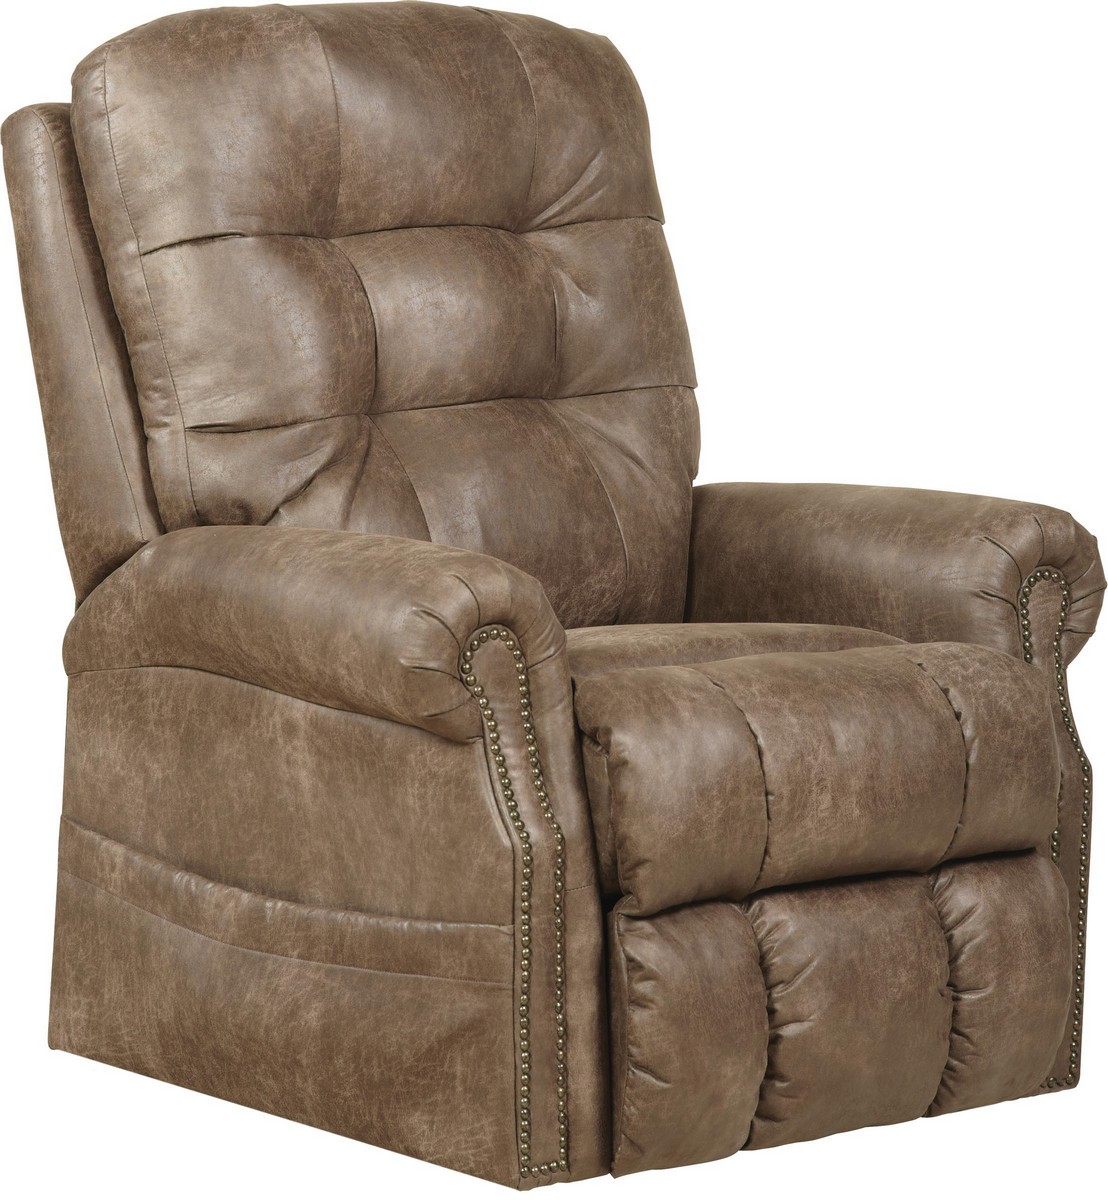 CatNapper Ramsey Power Lift Lay Flat Recliner with Heat and Massage - Silt